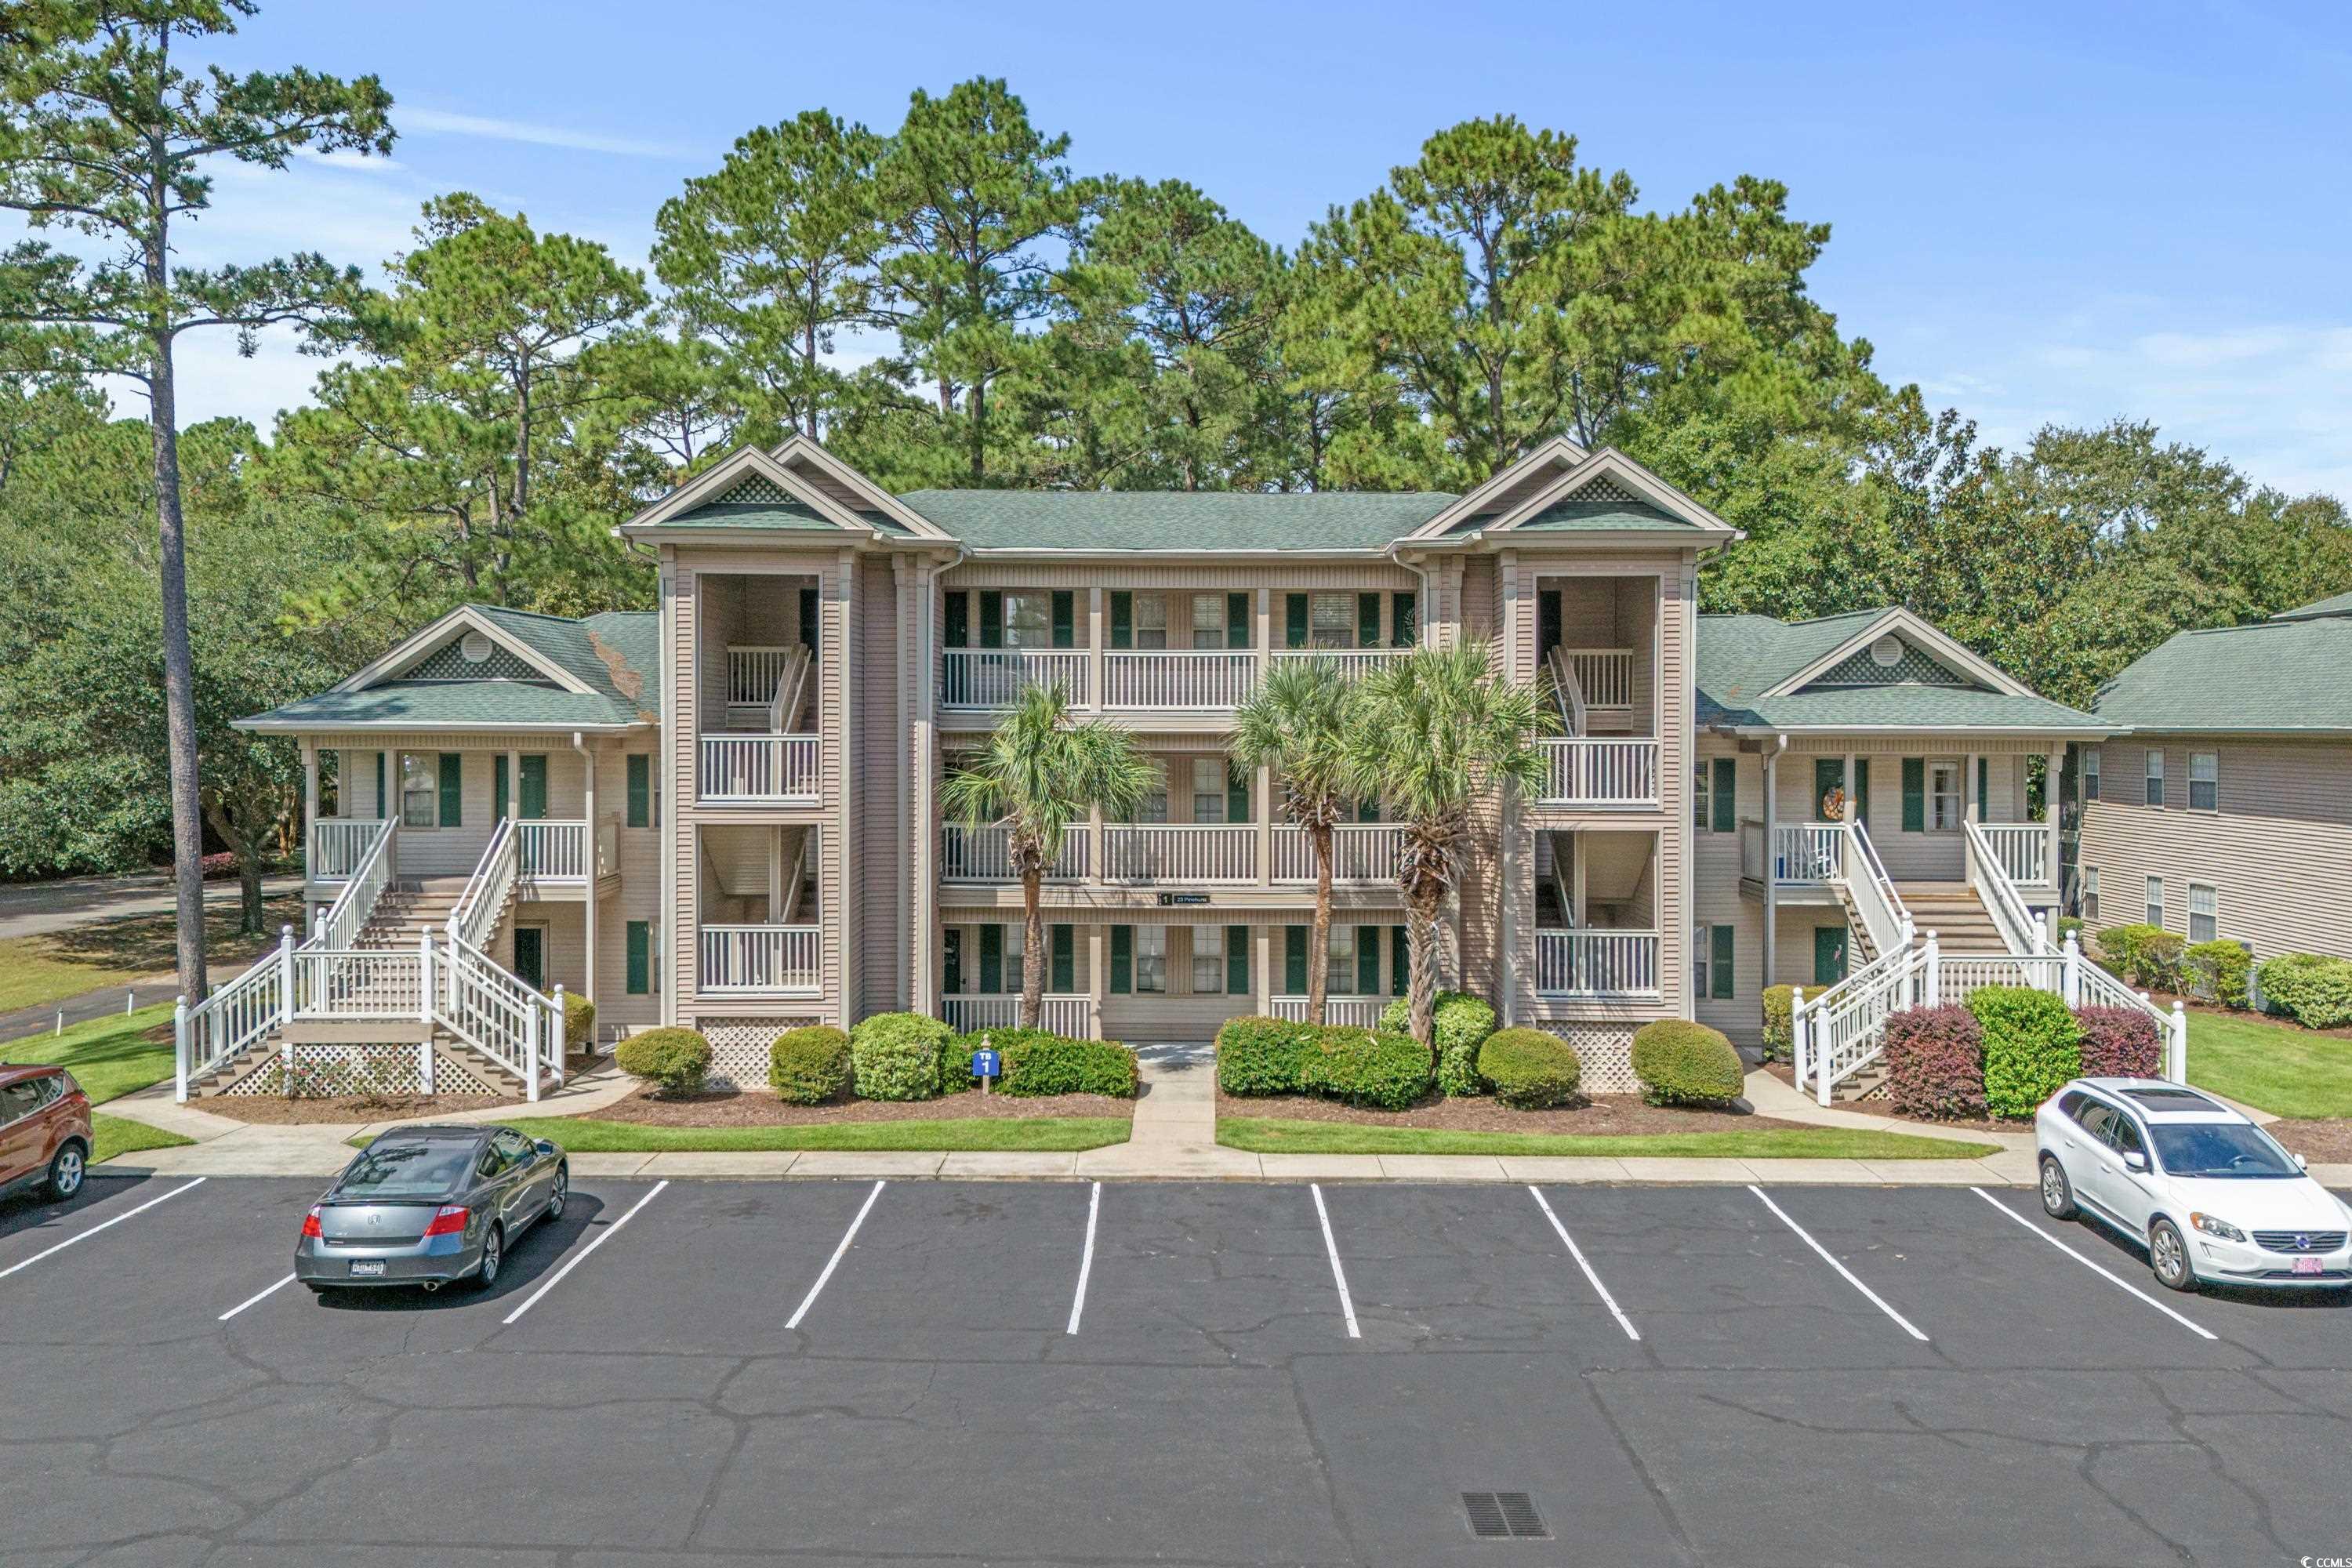 welcome to golf course coastal living at its finest! this charming condominium at 23 pinehurst lane #1-h in pawleys island offers a perfect blend of comfort, convenience, and tranquility. situated in the highly sought-after community of true blue golf & raquet resort, this 2-bedroom, 2-bathroom condo is an ideal retreat for those seeking a relaxed beach & golf lifestyle.   upon entering, you'll immediately appreciate the open and airy feel of the living area and dining space. the spacious living room is perfect for entertaining or simply unwinding after a day at the beach.  the kitchen boasts ample cabinet space, and a convenient breakfast bar, making meal preparation a breeze. enjoy your morning coffee or evening cocktails on the screened porch, where you can take in the serene views of the lush landscaping and golf course.  the primary bedroom suite offers a peaceful oasis with its private en-suite bathroom. the second bedroom is equally spacious and can accommodate guests comfortably.  residents of true blue enjoy access to a host of amenities, including the true blue golf course, an outdoor pool, and tennis courts. just a short drive away, you'll find beautiful beaches, shopping, dining, and all the attractions that pawleys island has to offer.  don't miss the opportunity to make this pawleys island gem your own. whether you're looking for a vacation retreat or a year-round residence, 23 pinehurst lane #1-h has everything you need to embrace the coastal lifestyle.